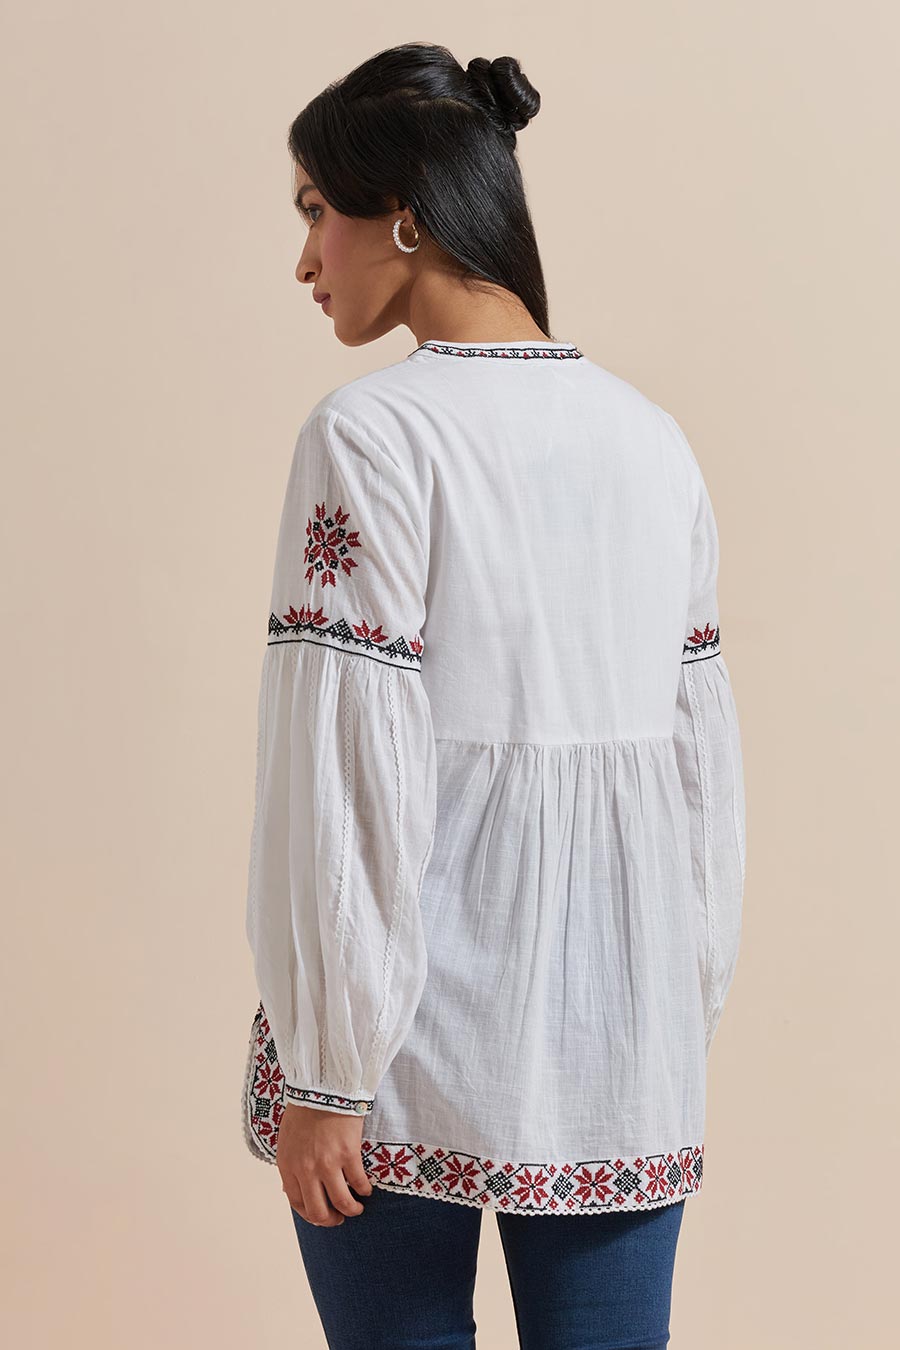 Shop White Cotton Embroidered Top by MUKUL at House of Designers – HOUSE OF  DESIGNERS